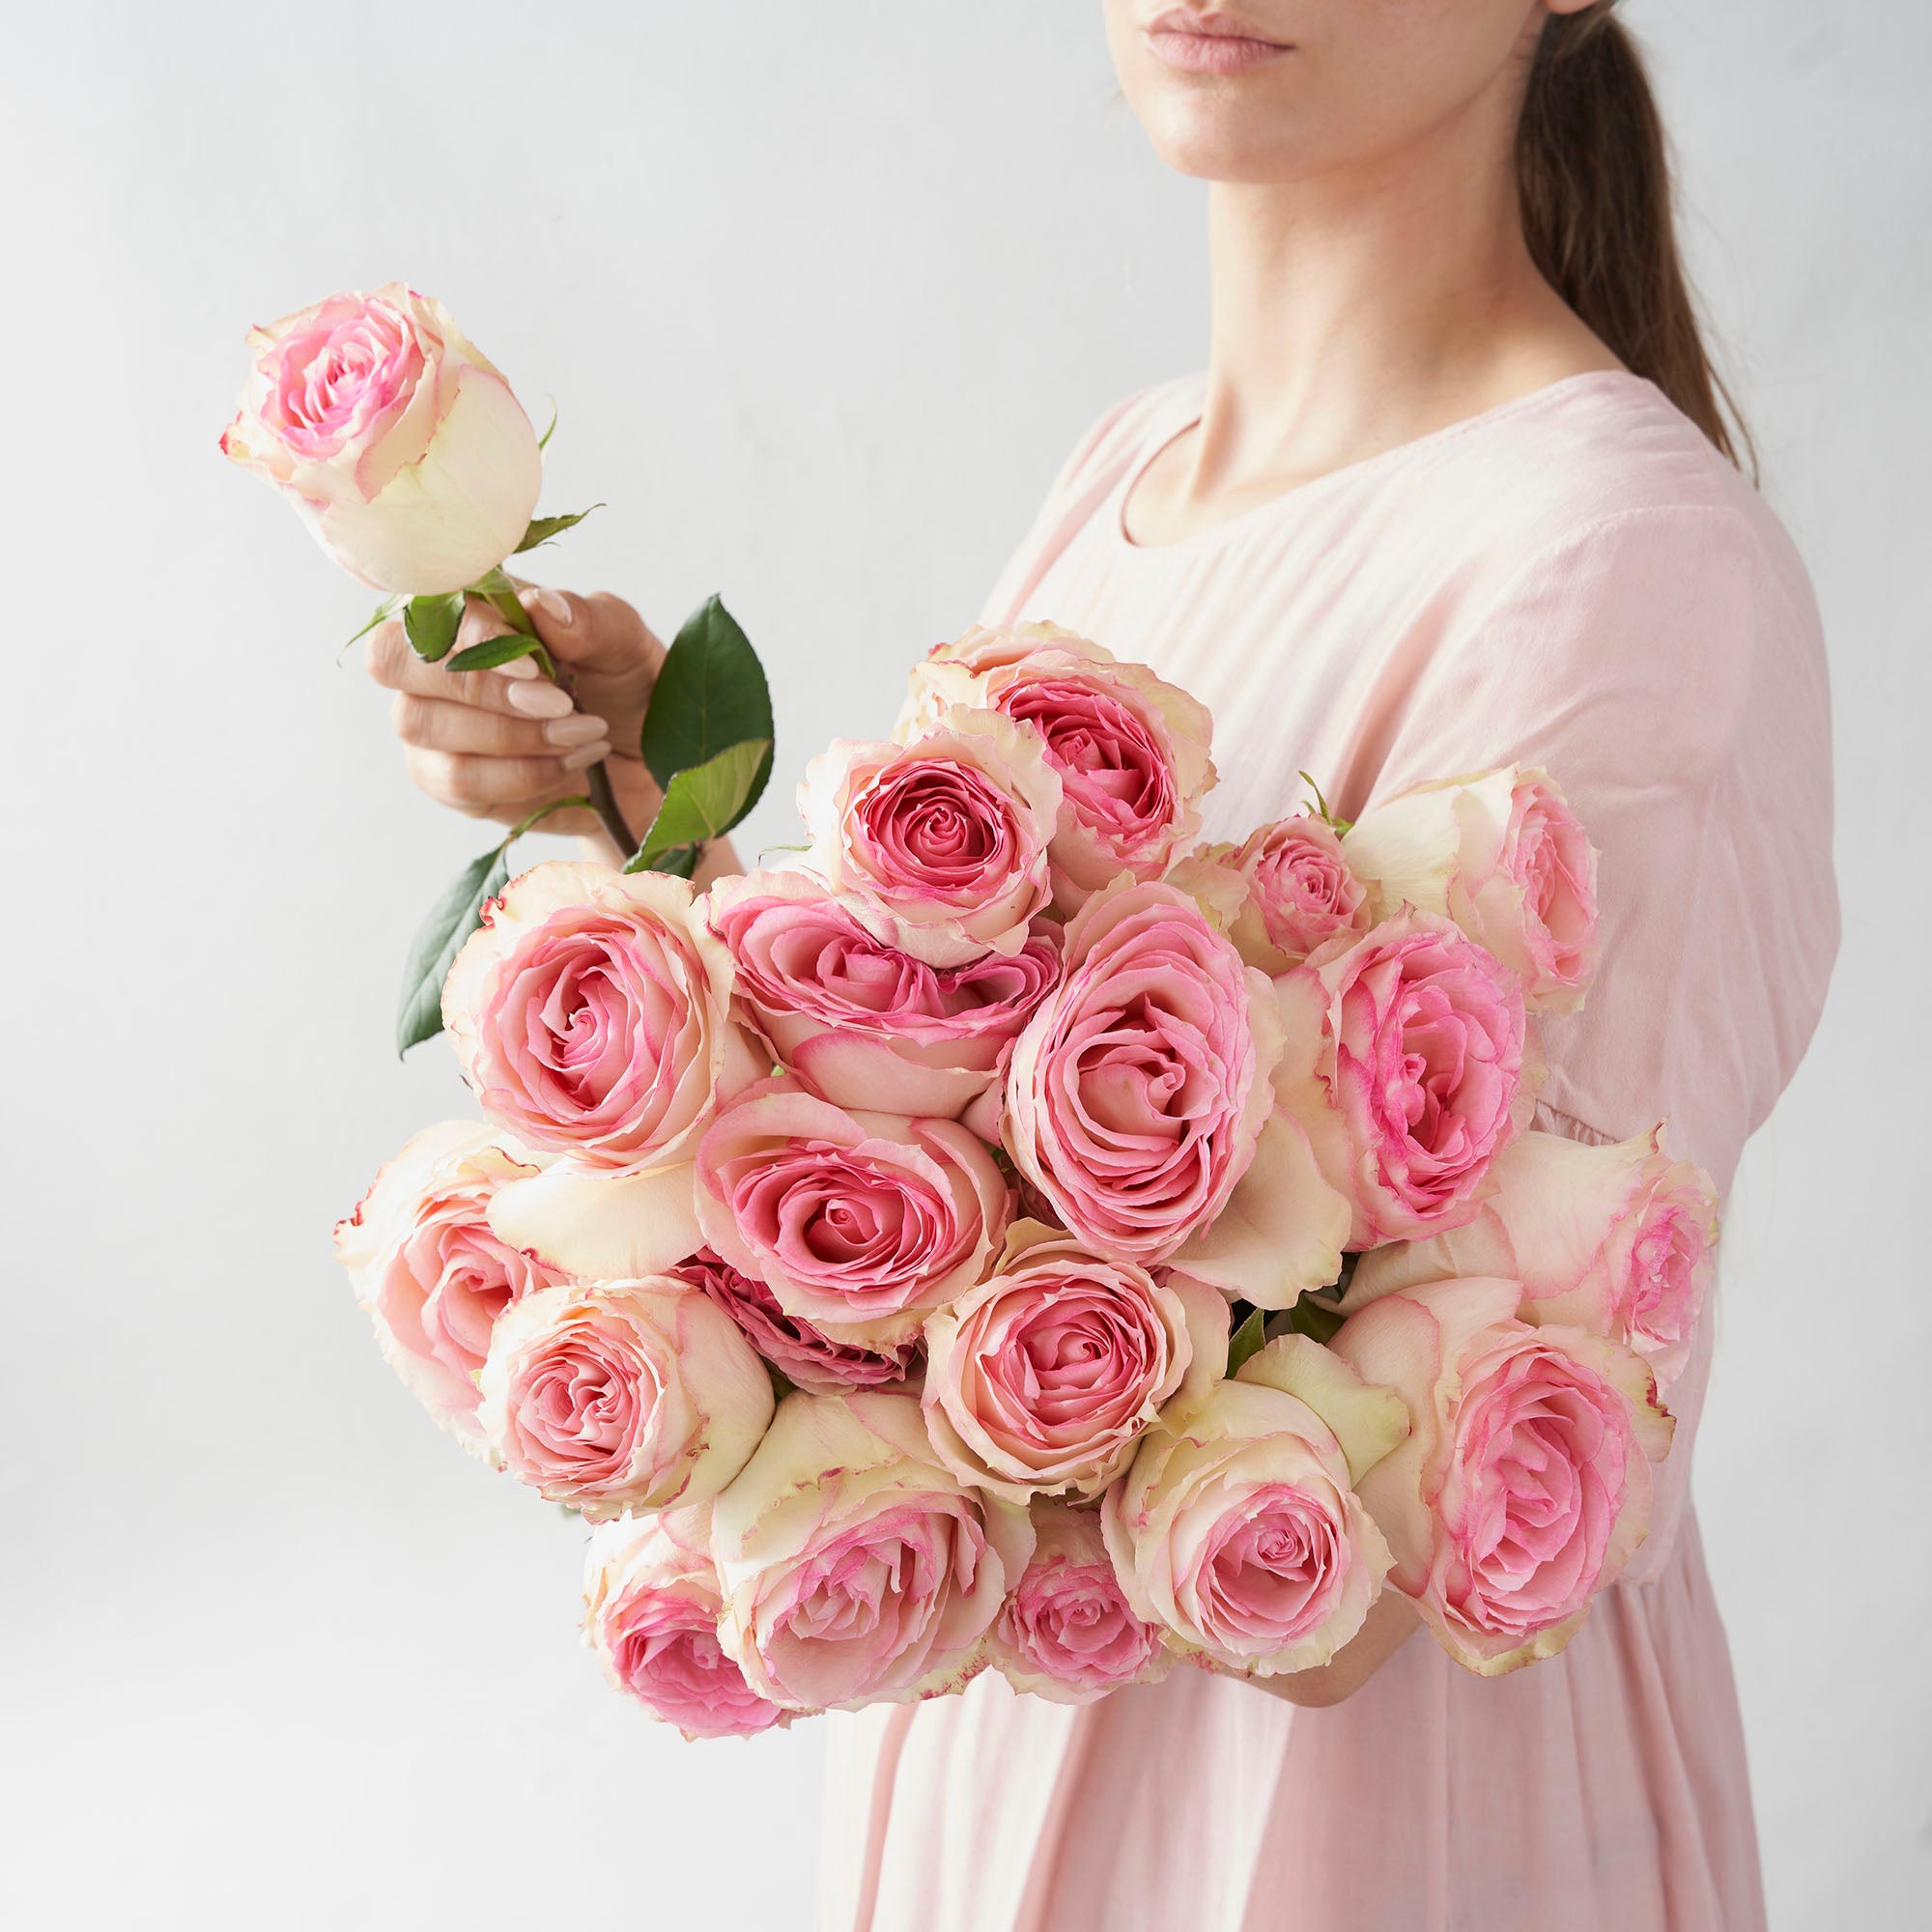 Woman in pink shirt holding large bouquet of pink Esperance roses.